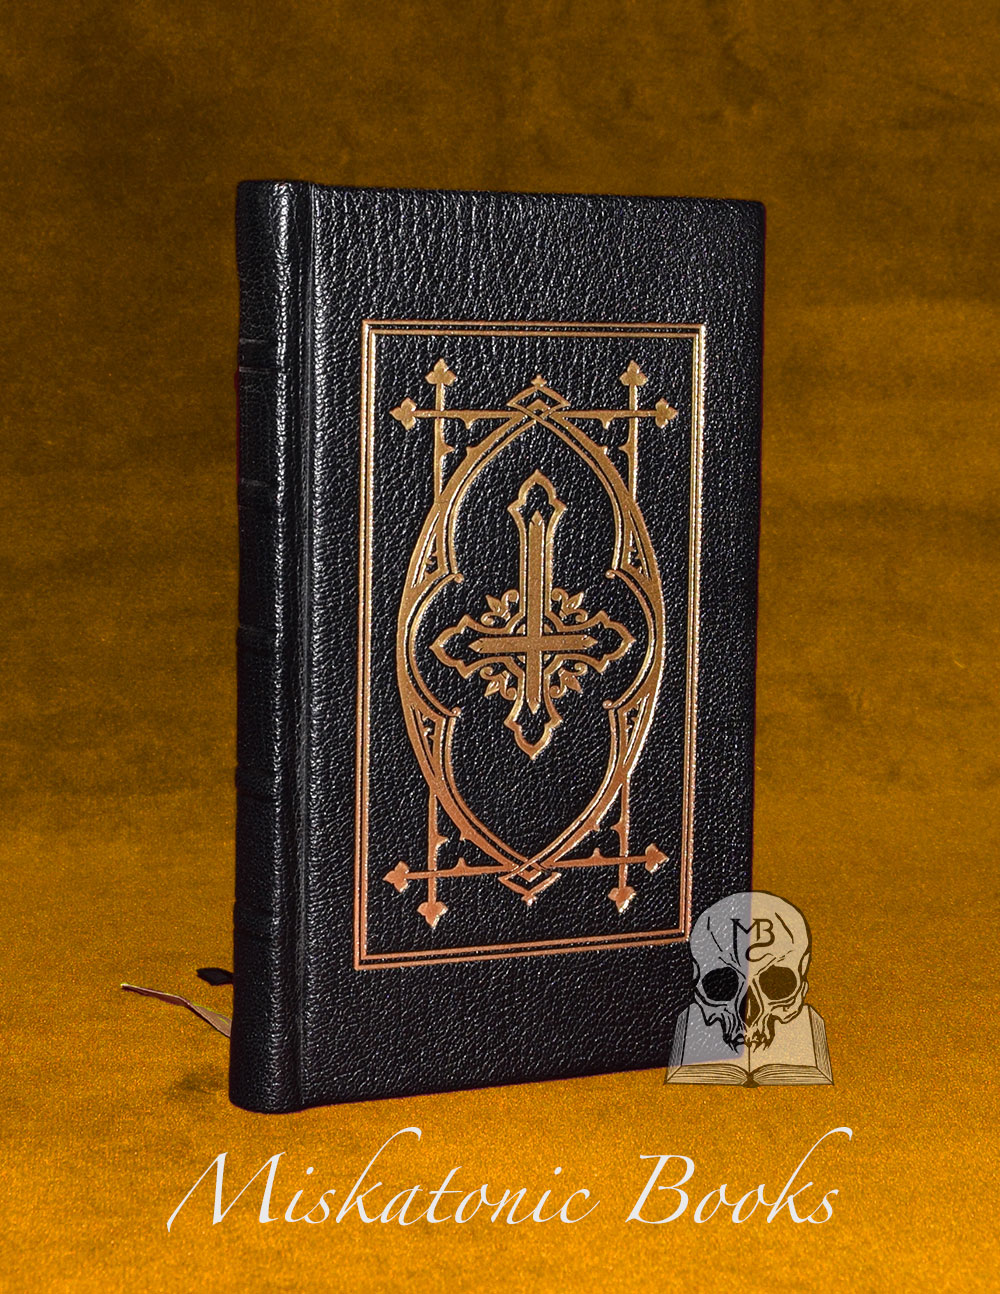 THE CATECHISM OF LUCIFER by Johannes Nefastos - Deluxe Leather Bound Hardcover Edition